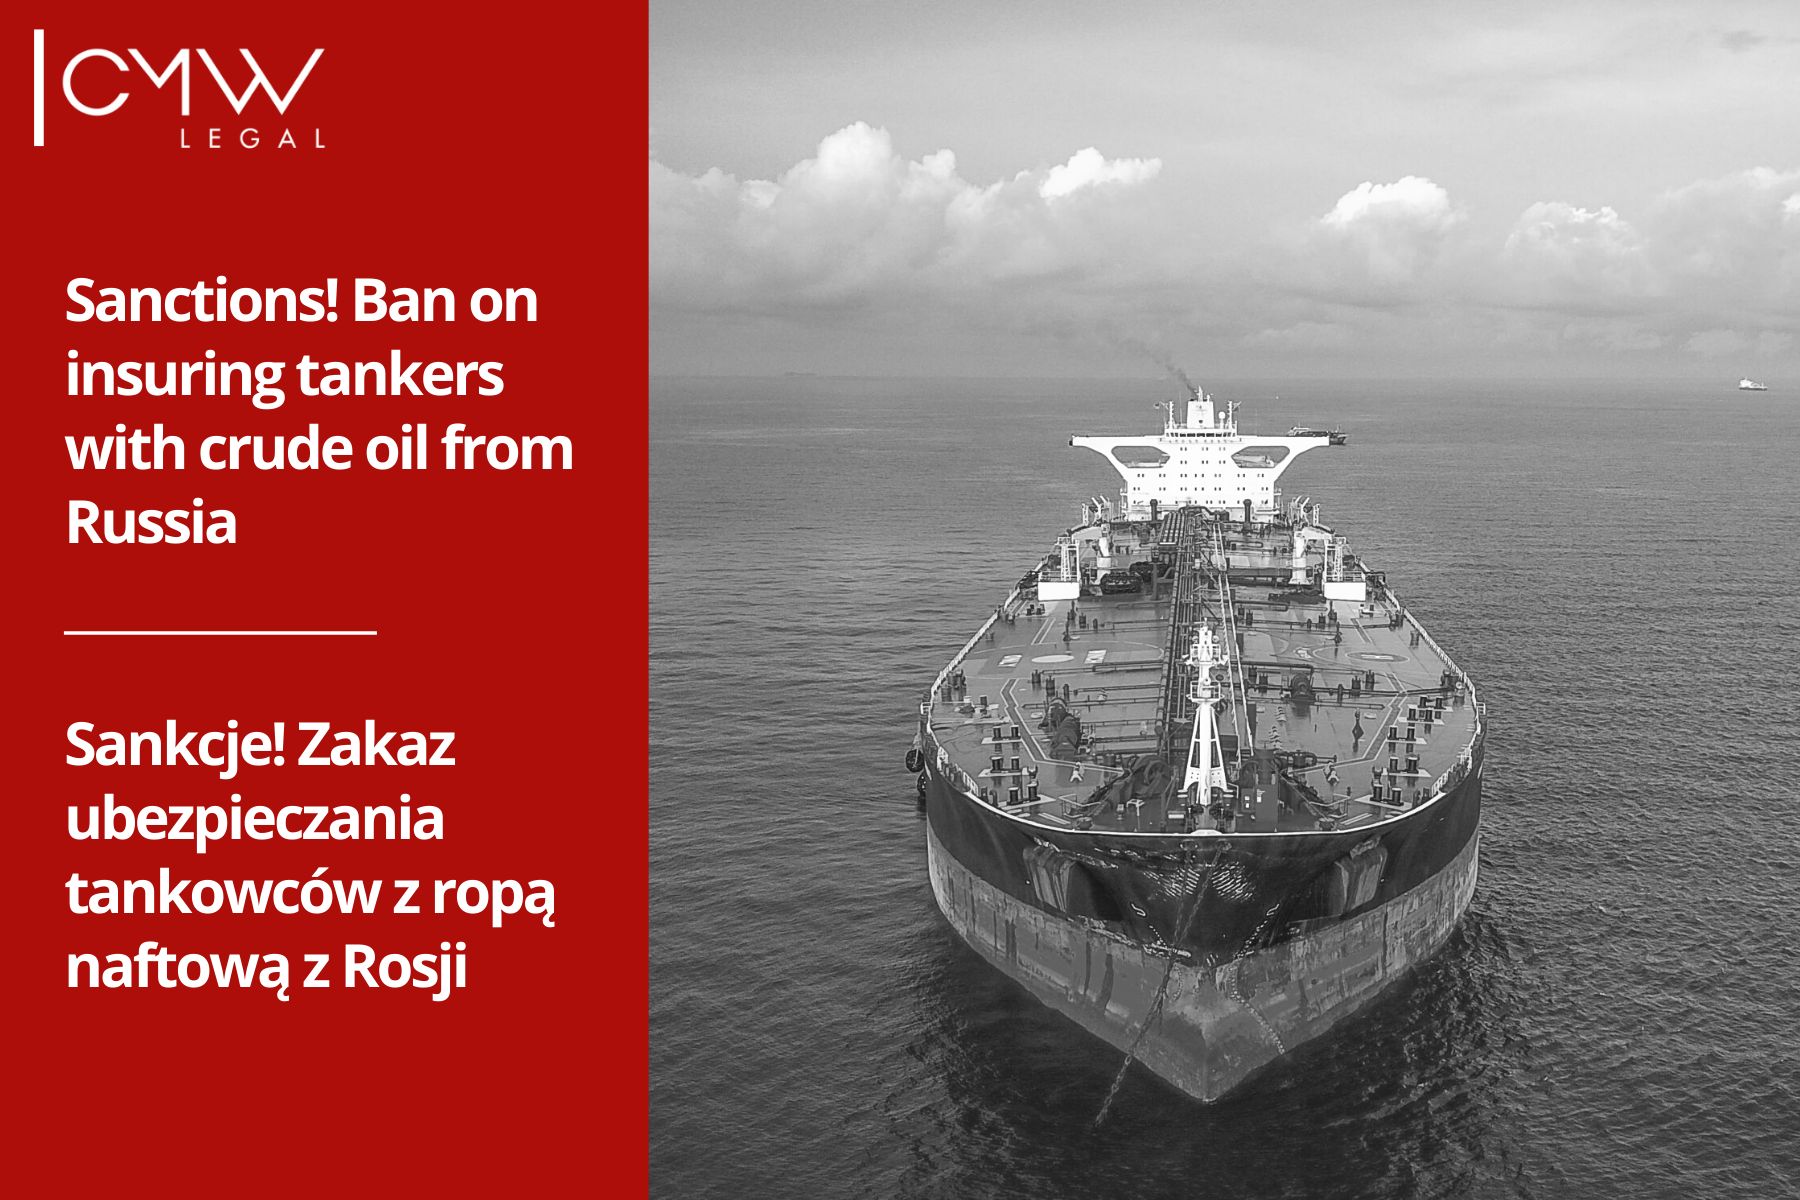  Sanctions! Ban on insuring tankers with crude oil from Russia